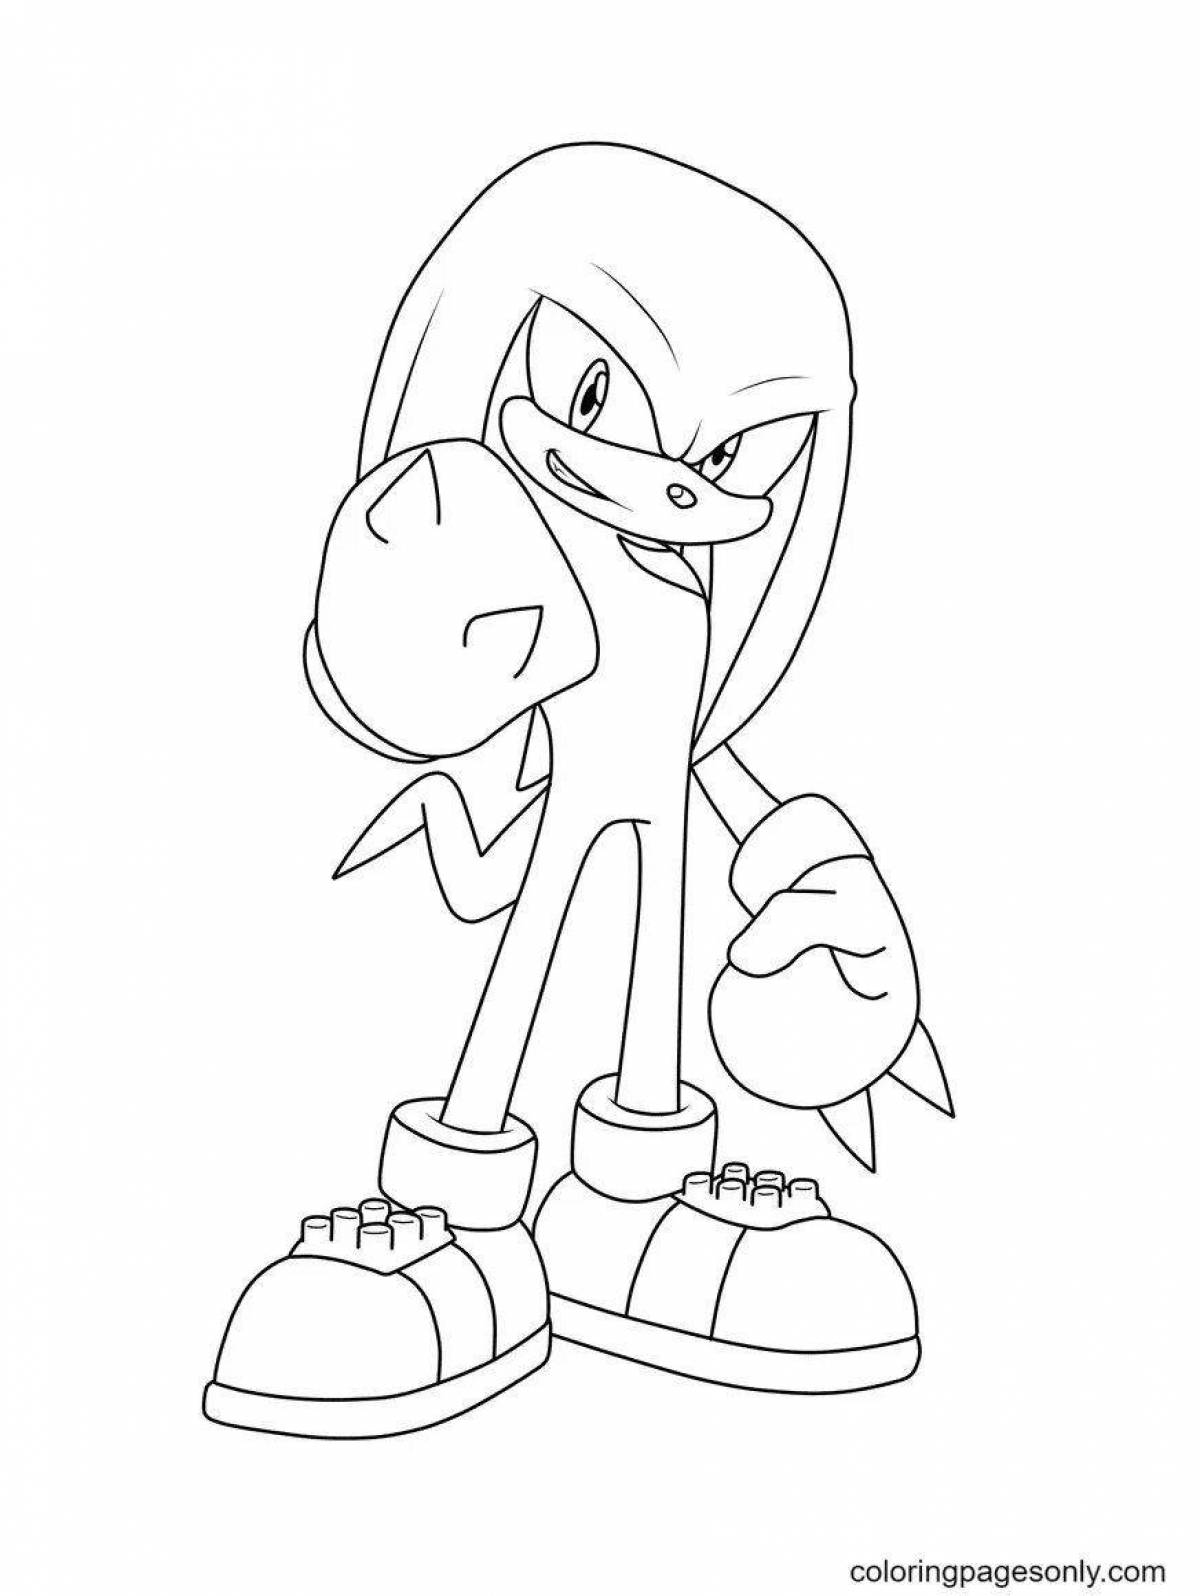 Knuckles the echidna coloring book